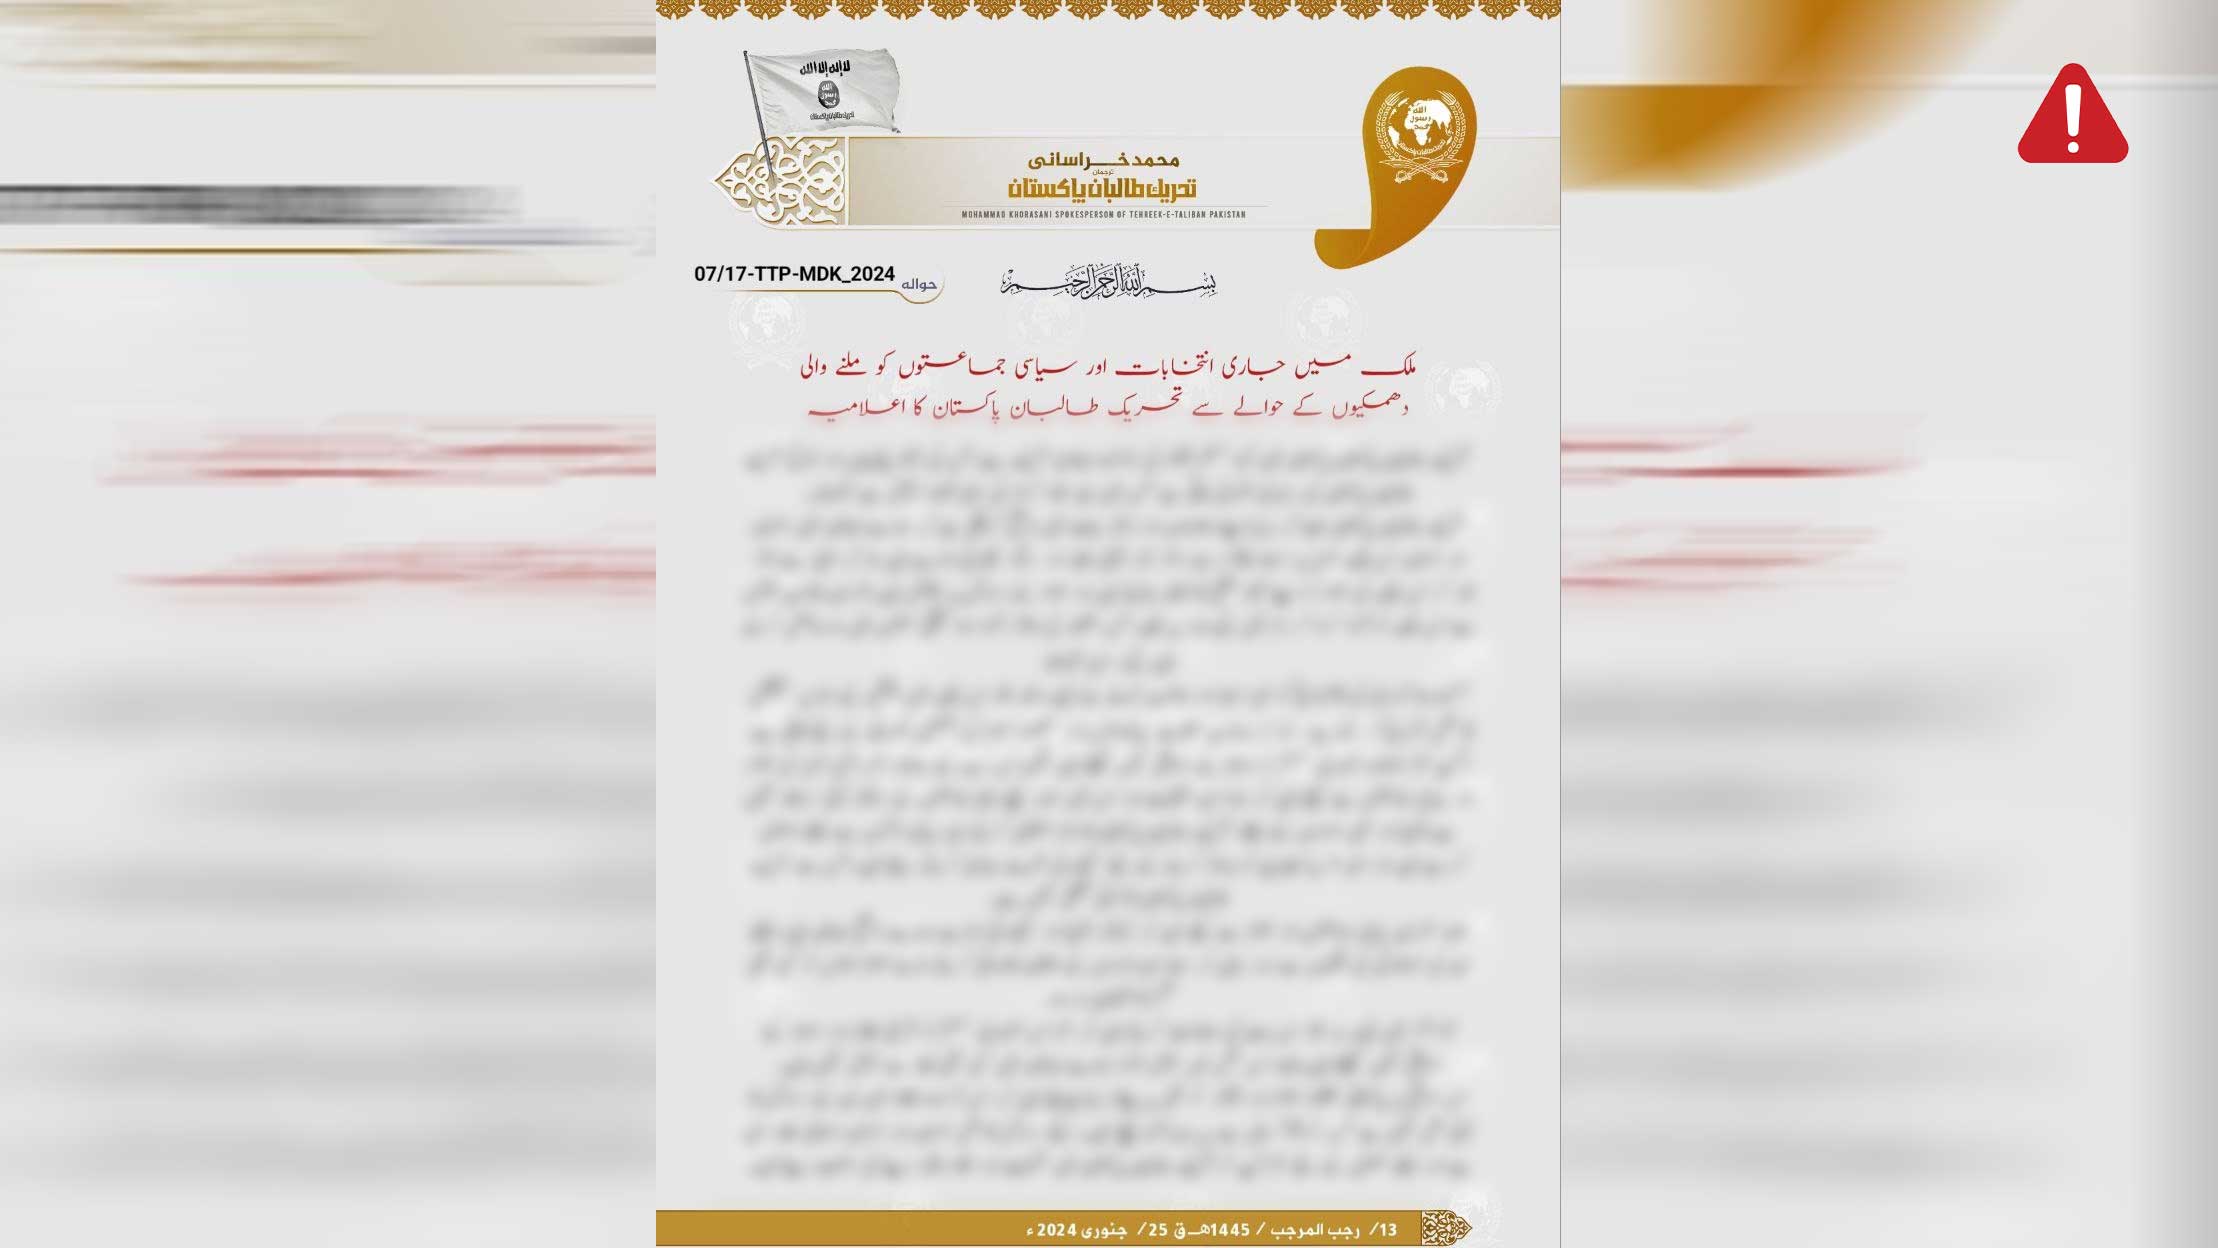 TKD MONITORING: Pakistani Taliban (TTP) Claims They Will Not Attack the Upcoming Elections